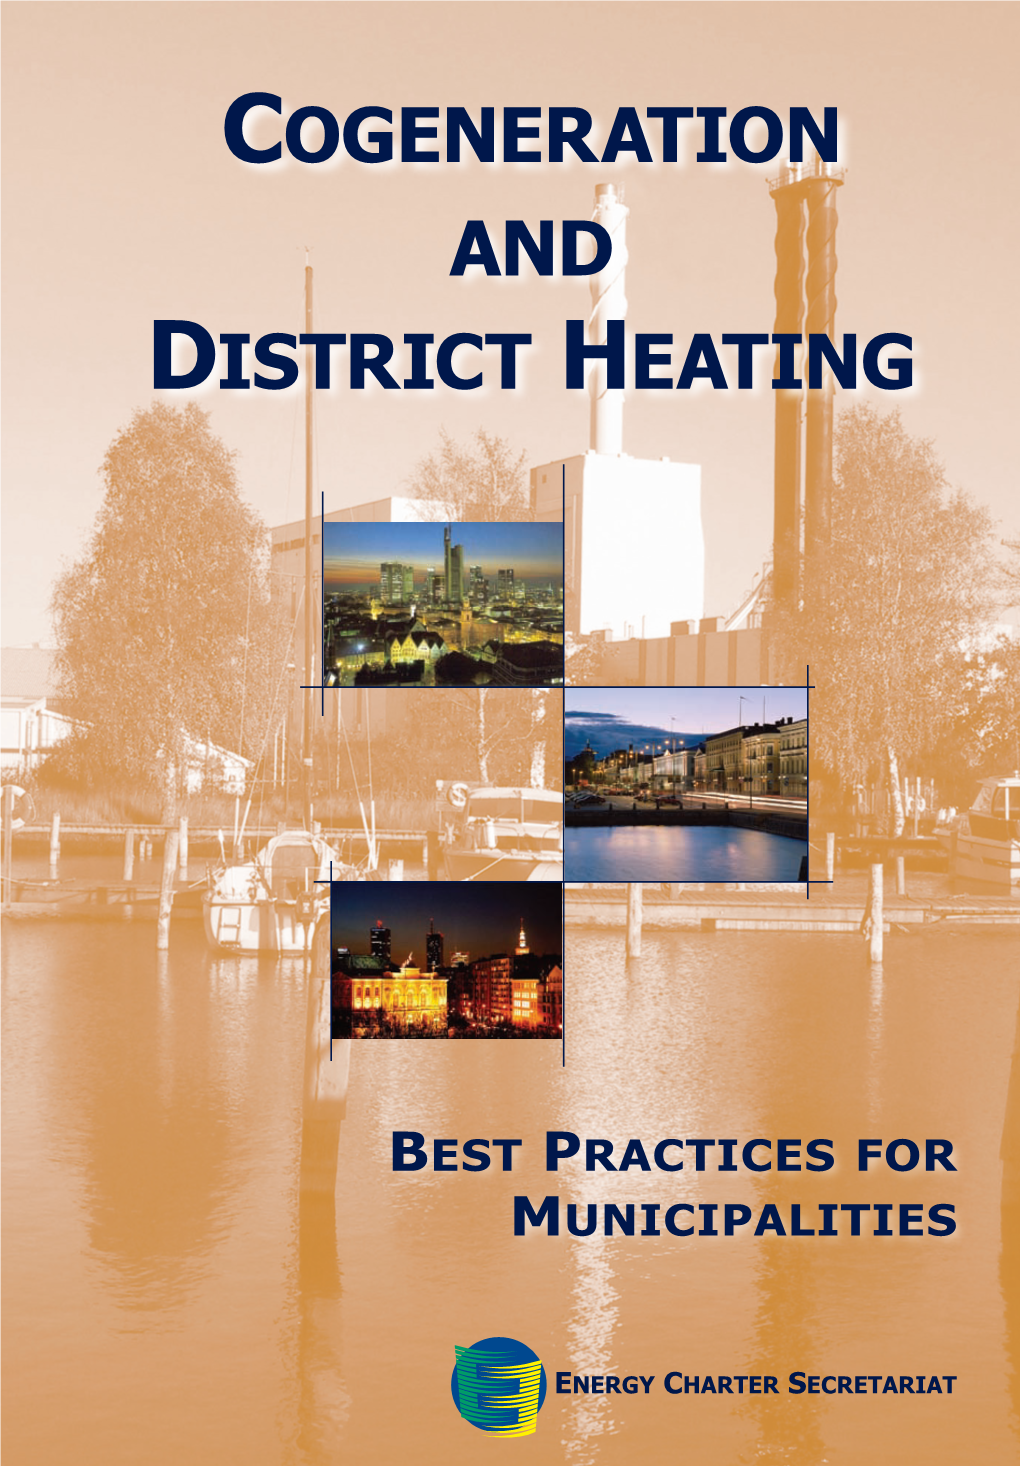 Cogeneration and District Heating